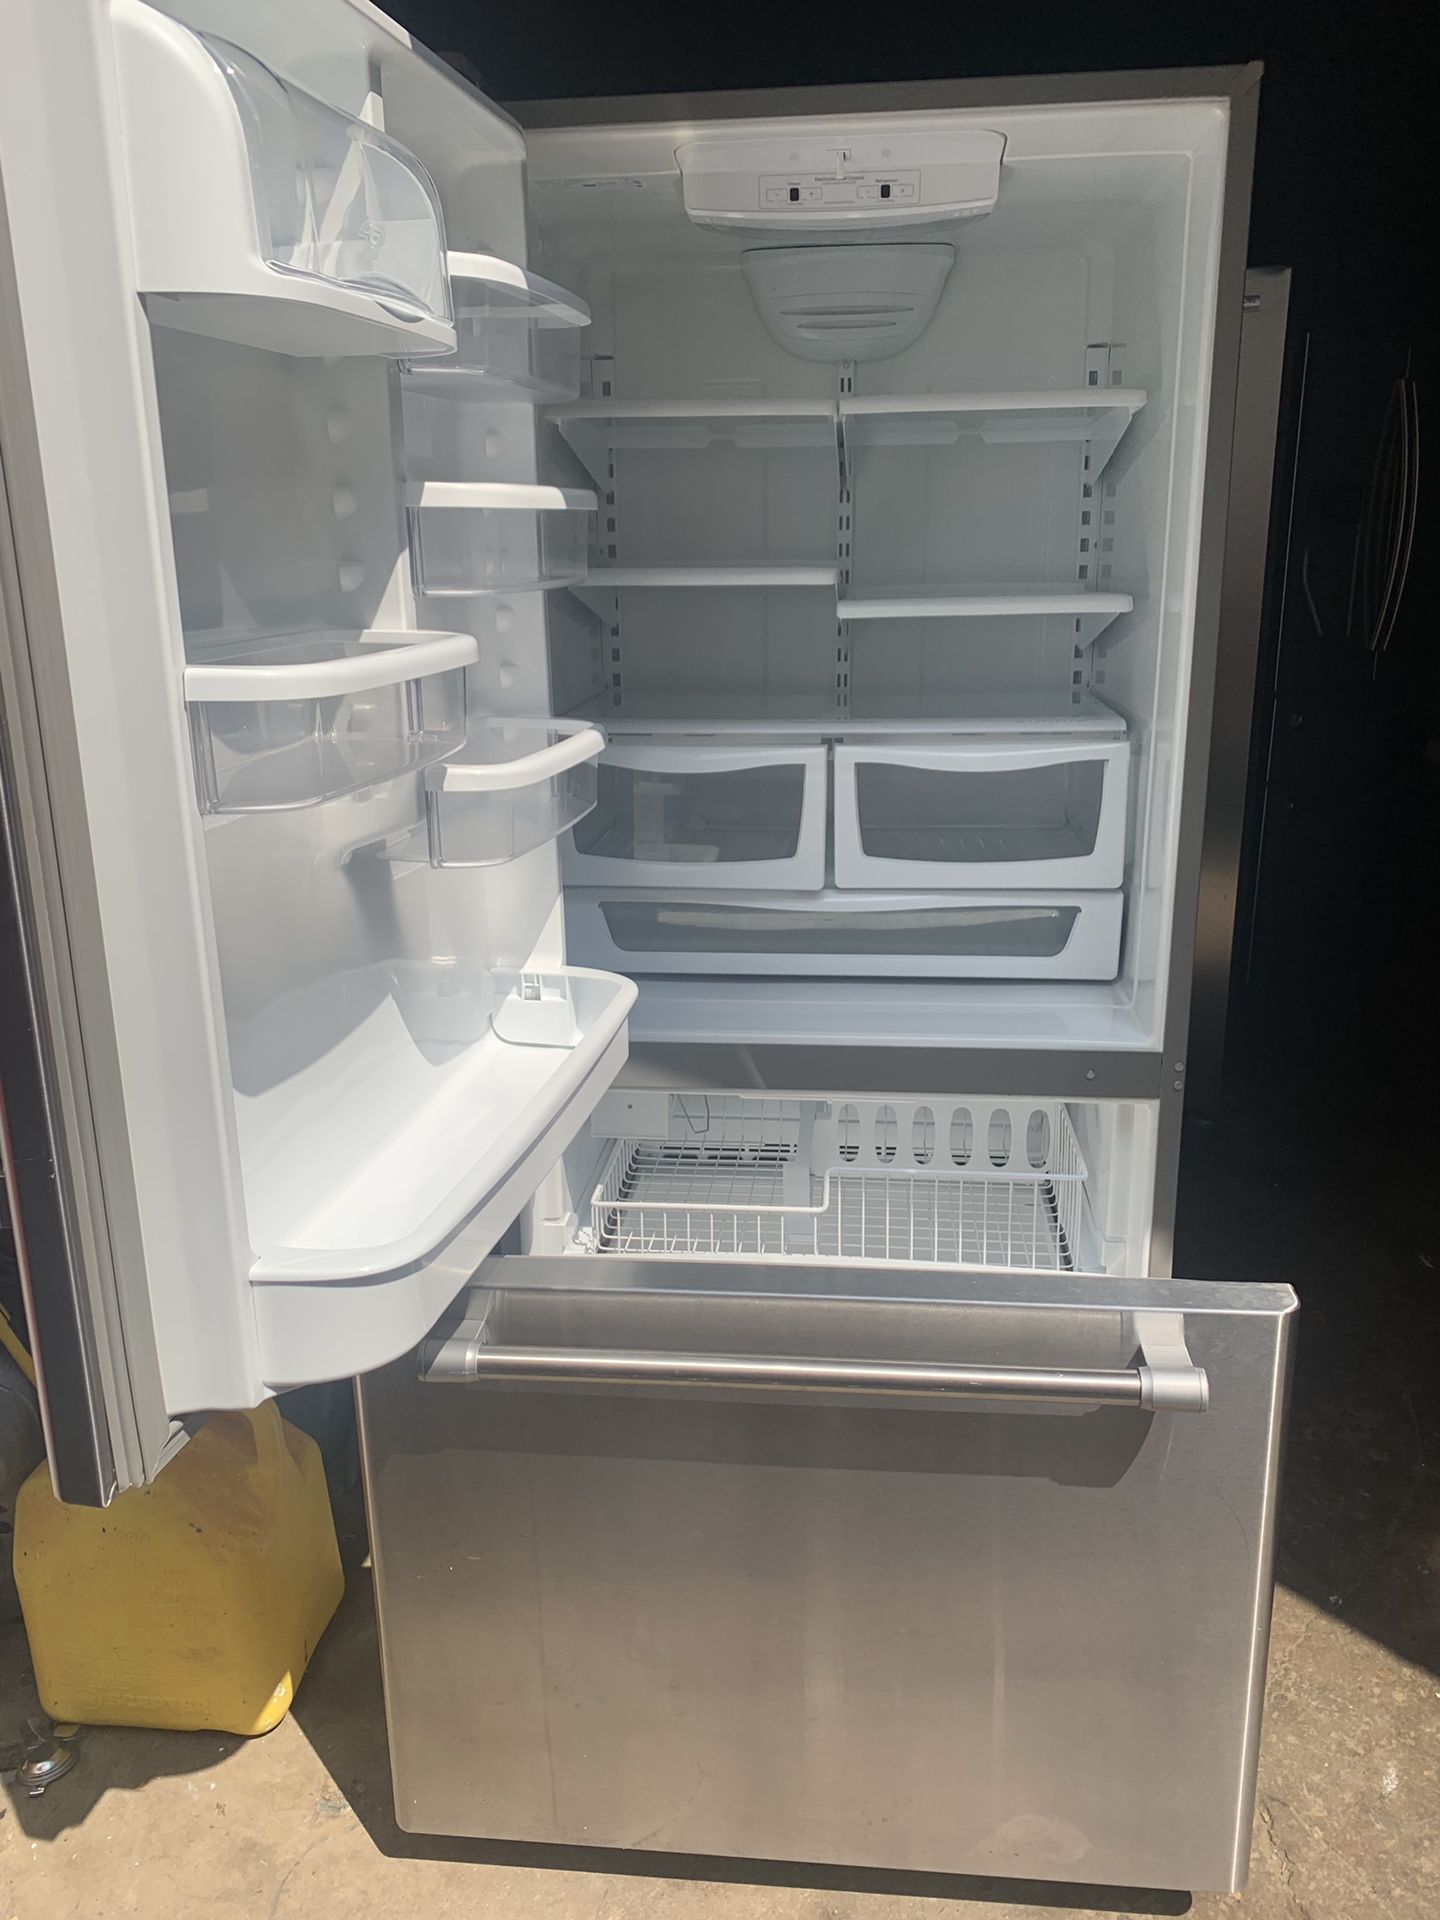 Maytag 33in. Bottom freezer refrigerator in excellent conditions with 4 months warranty